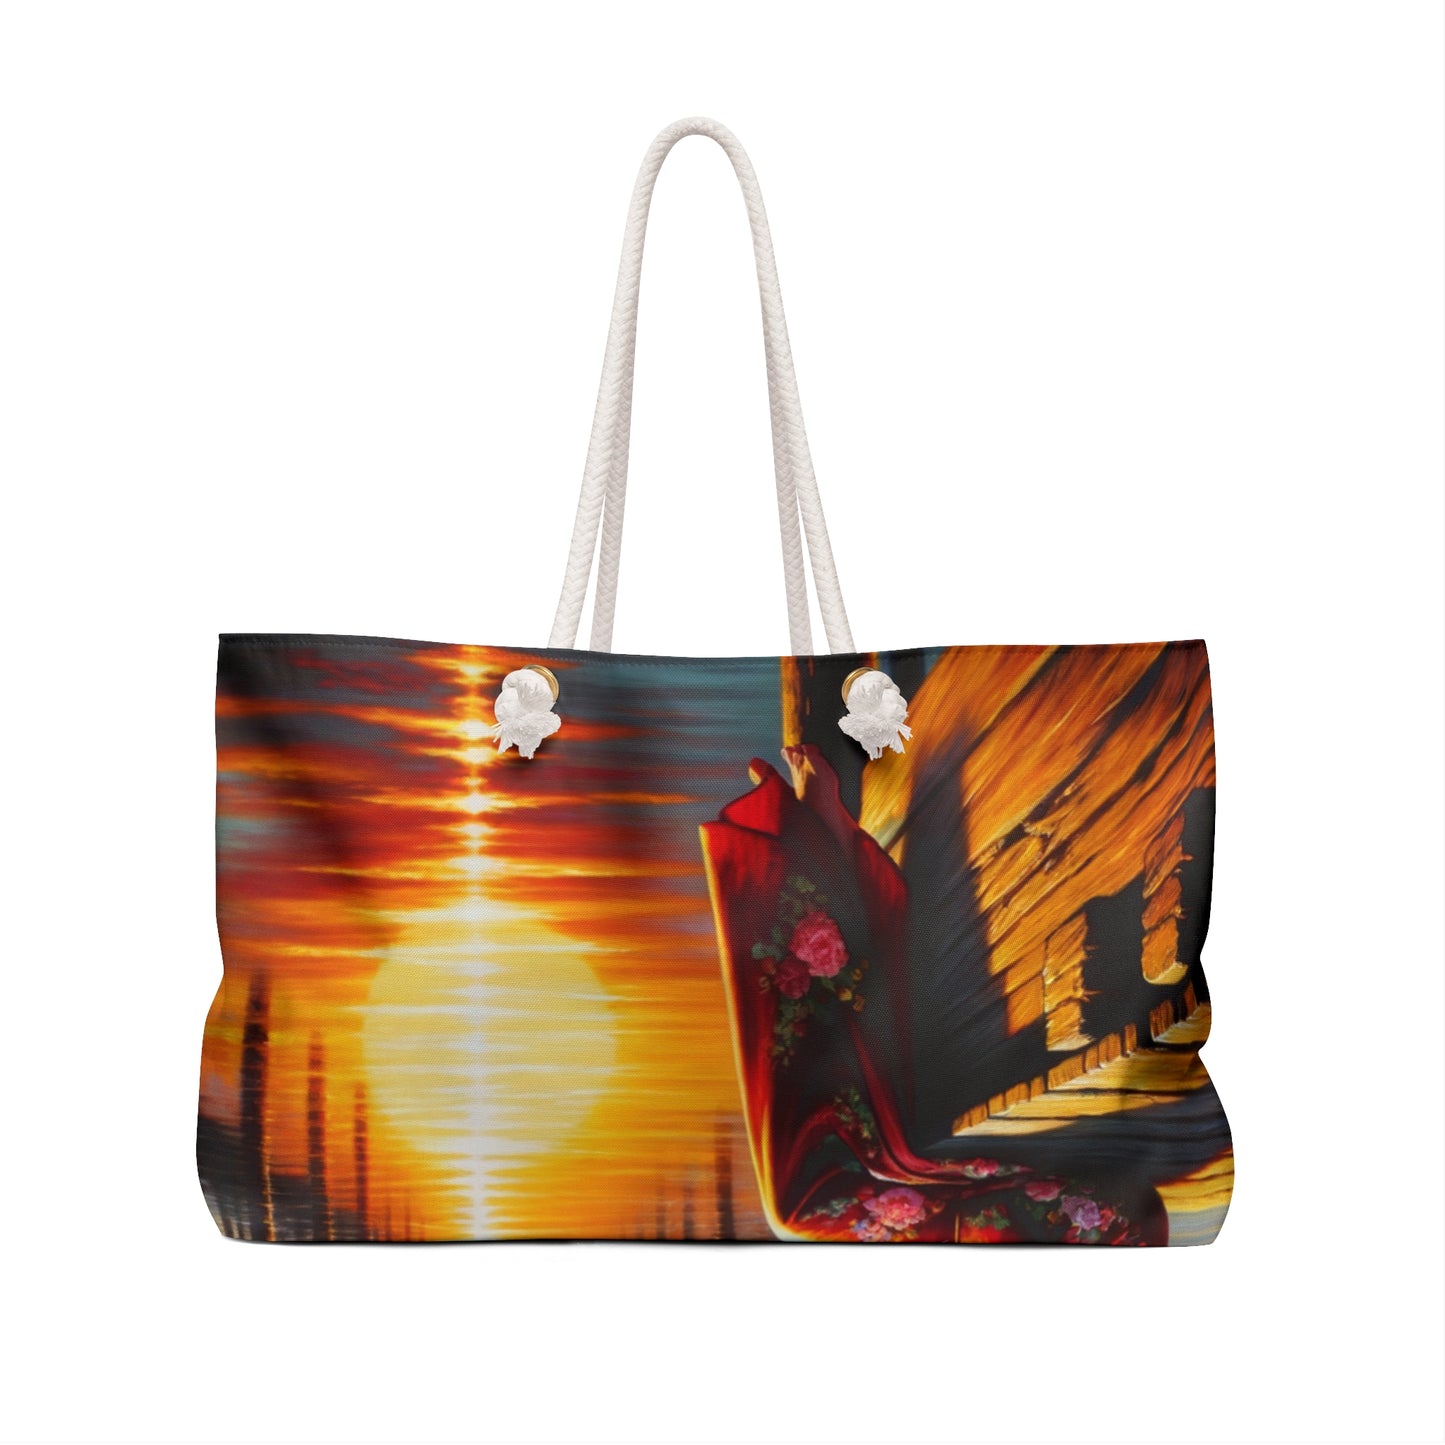 "Golden Reflections" - The Alien Weekender Bag Impressionism Style